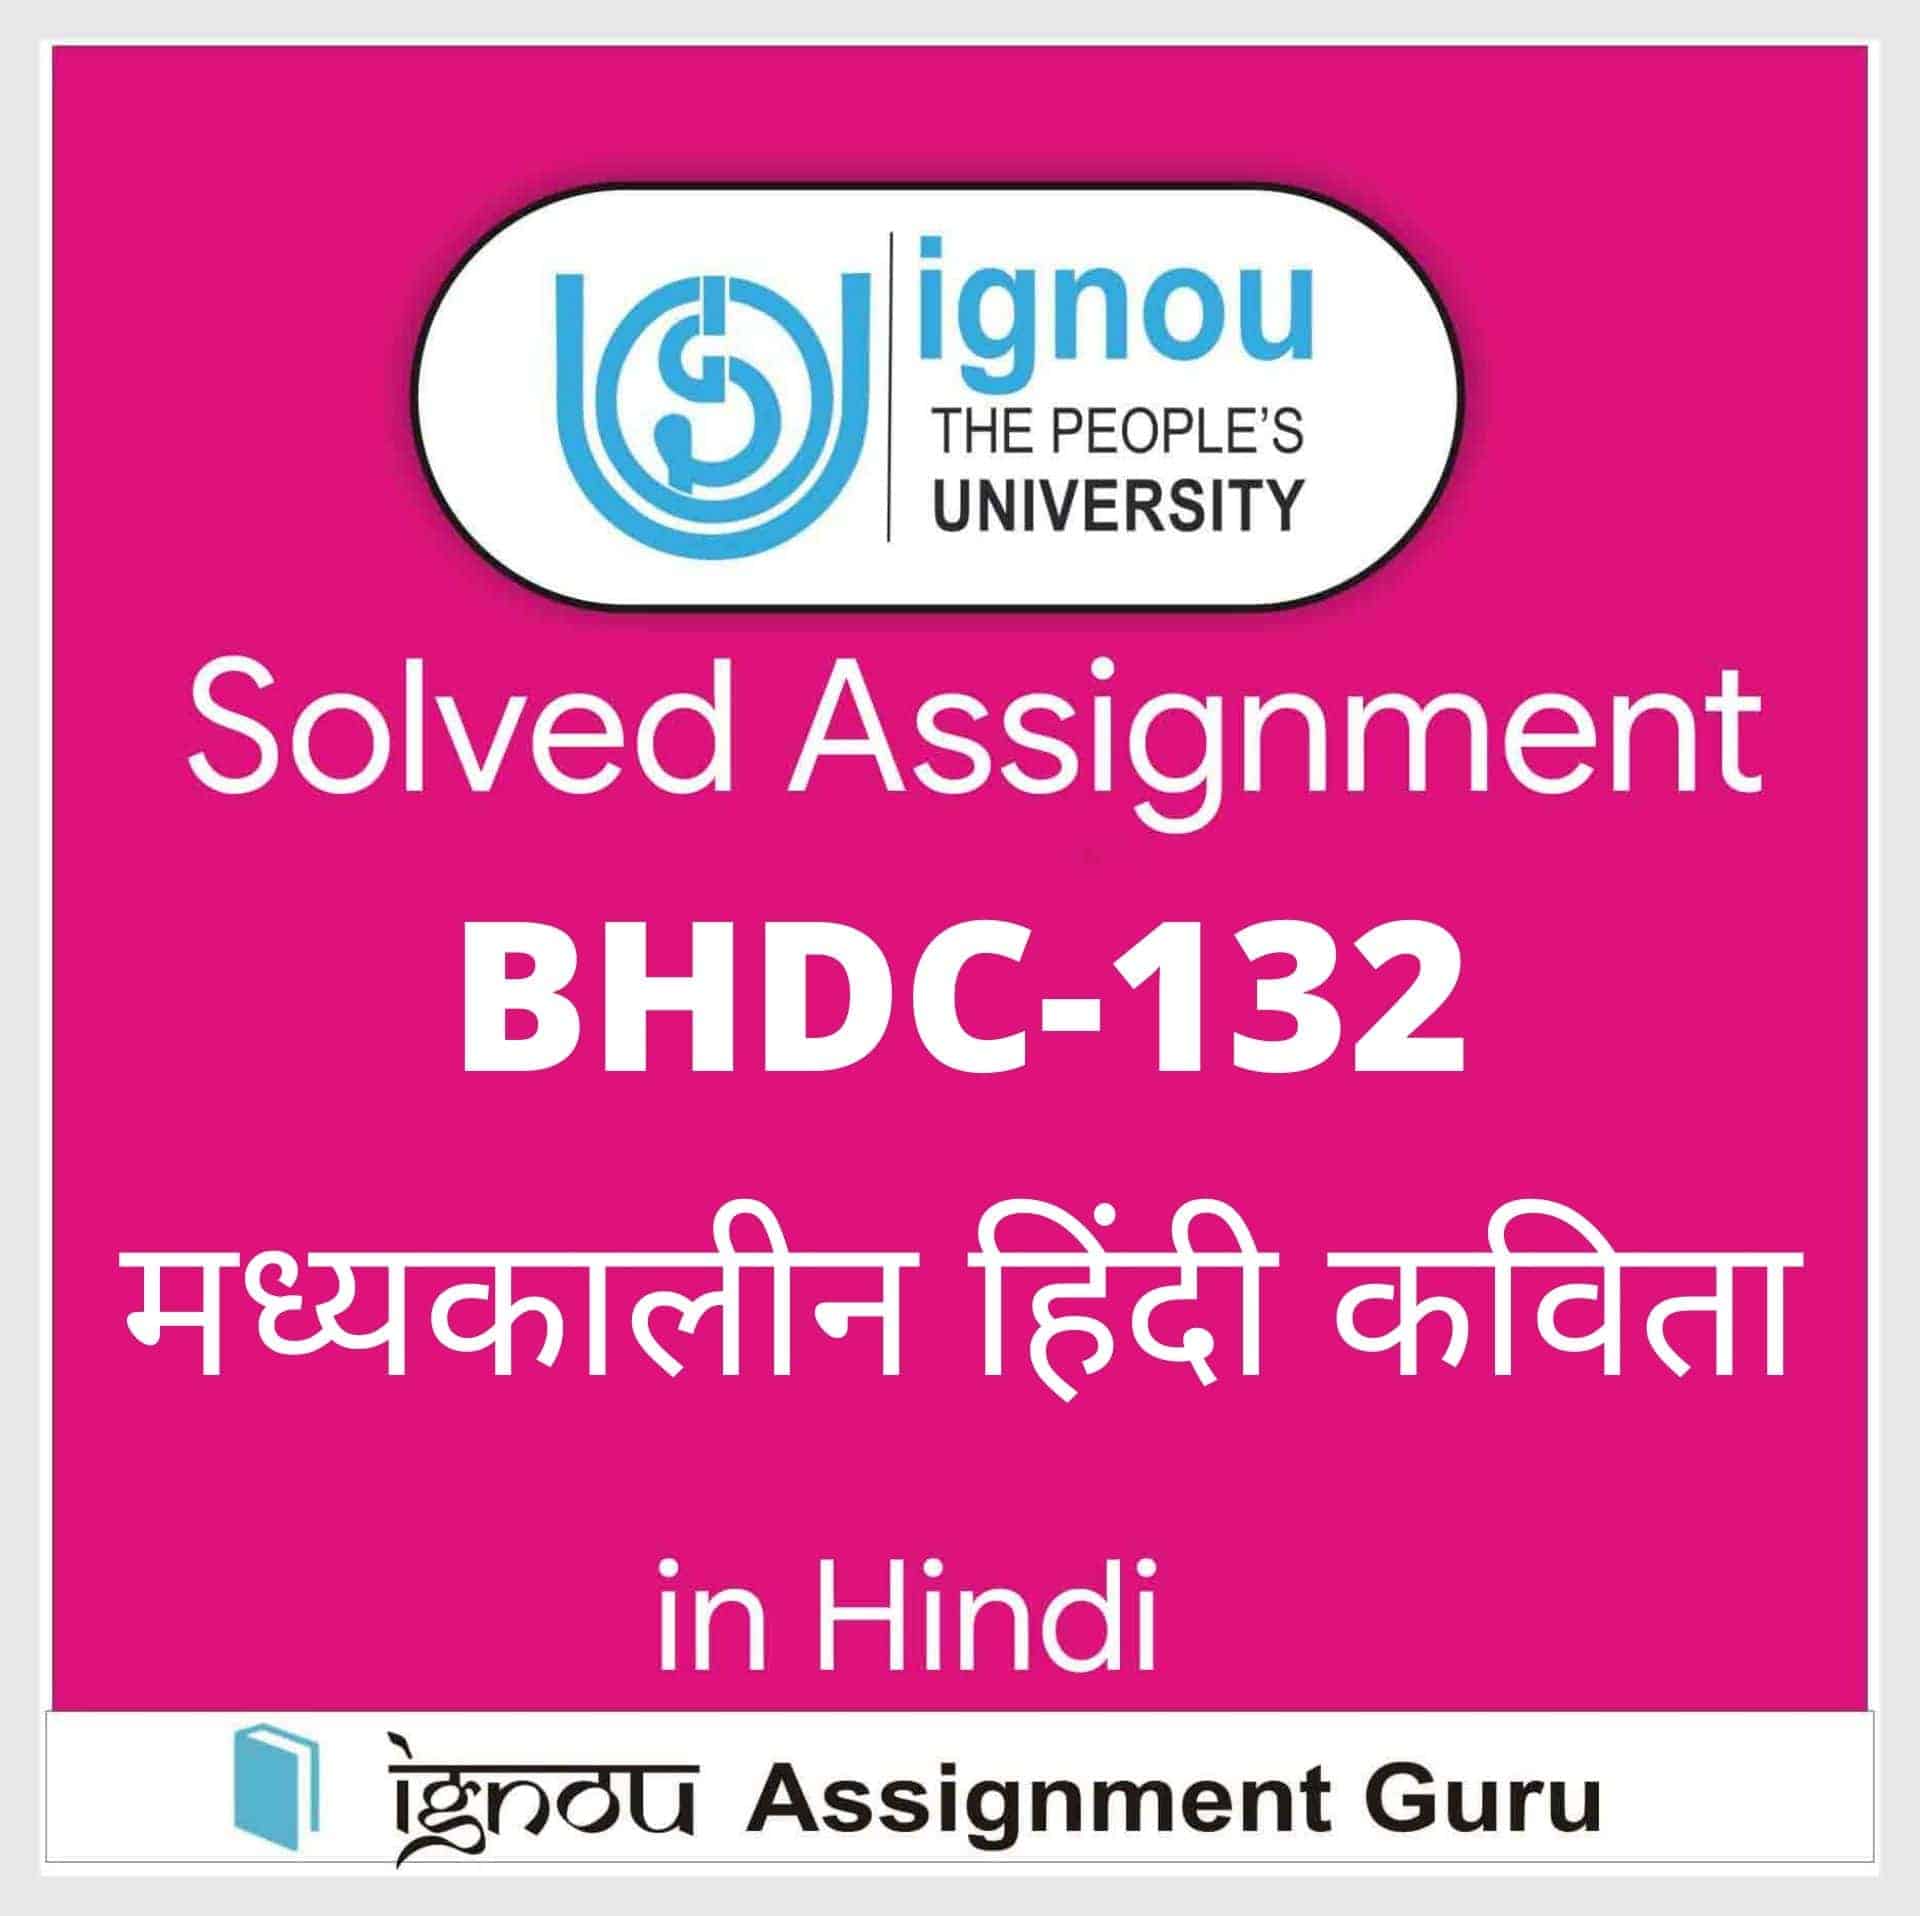 onr3 ignou assignment question paper in hindi